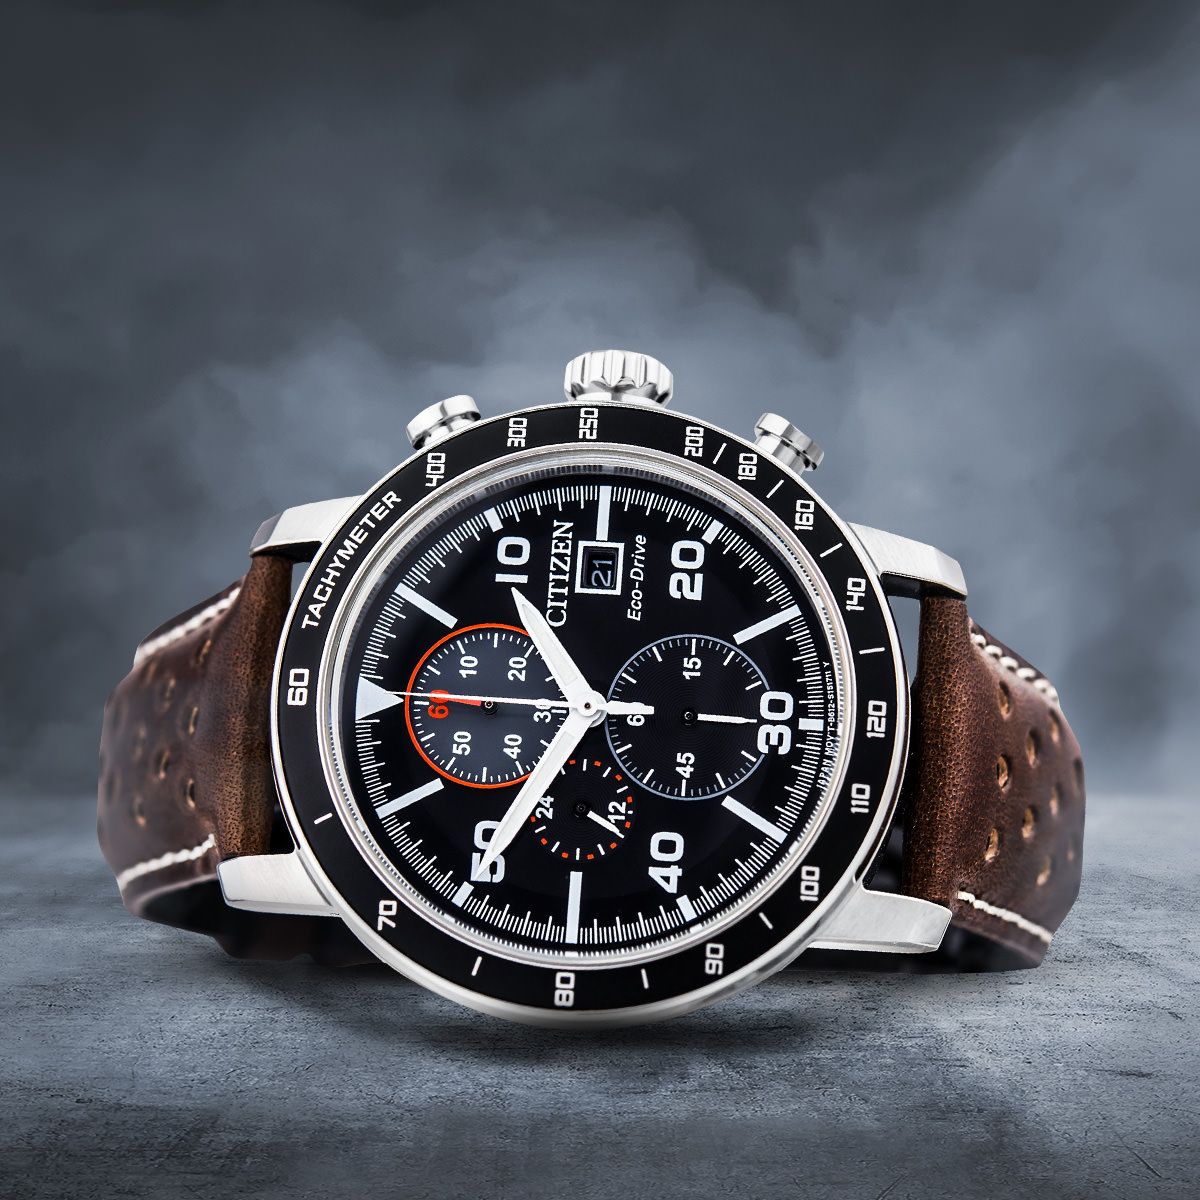 Celebrating Hundred Years Of Citizen Watches—The Choice Of The Champions